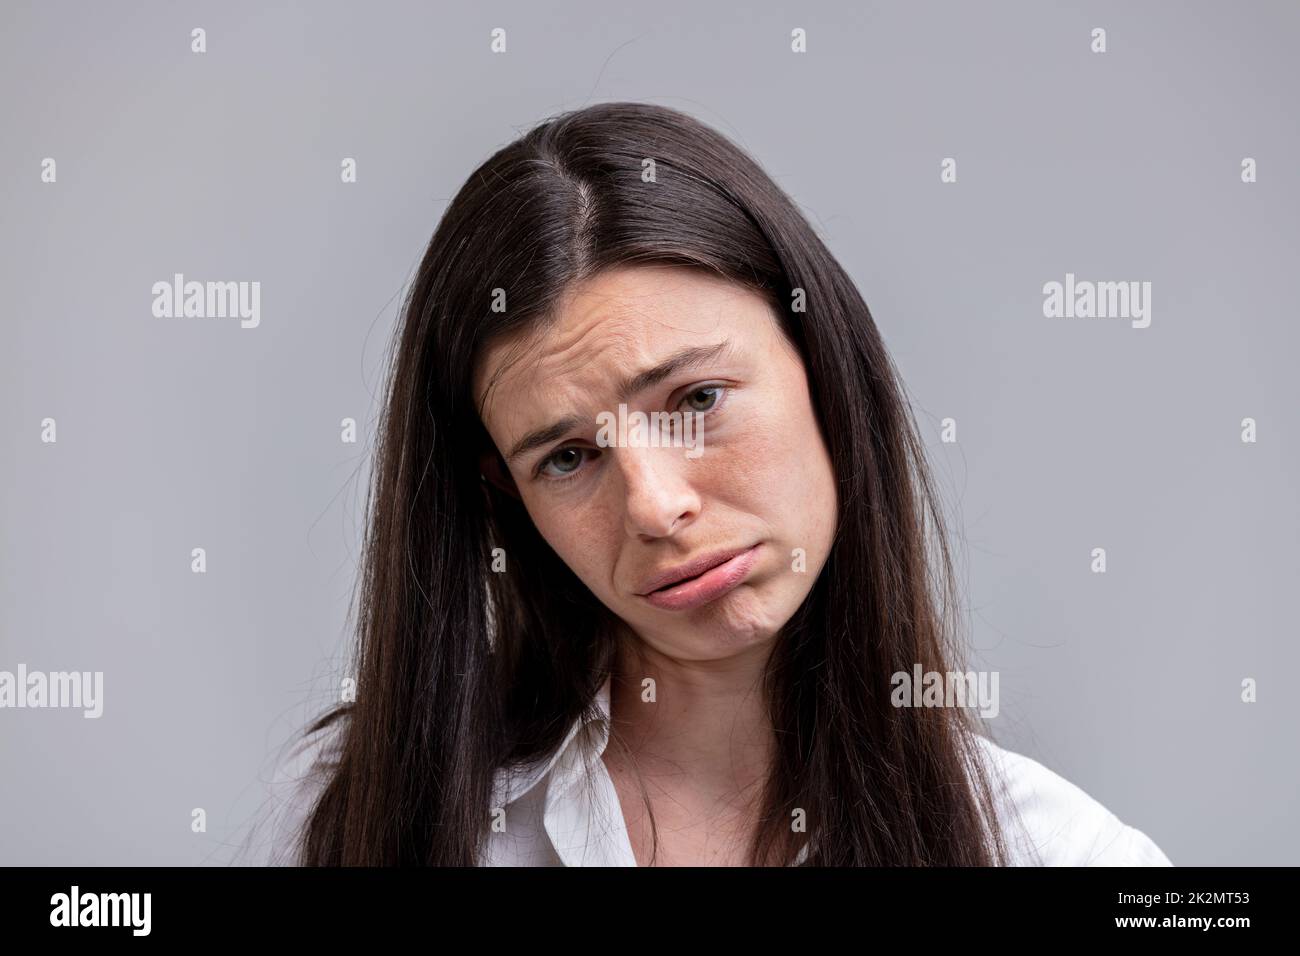 Portrait of young long-haired dejected woman Stock Photo